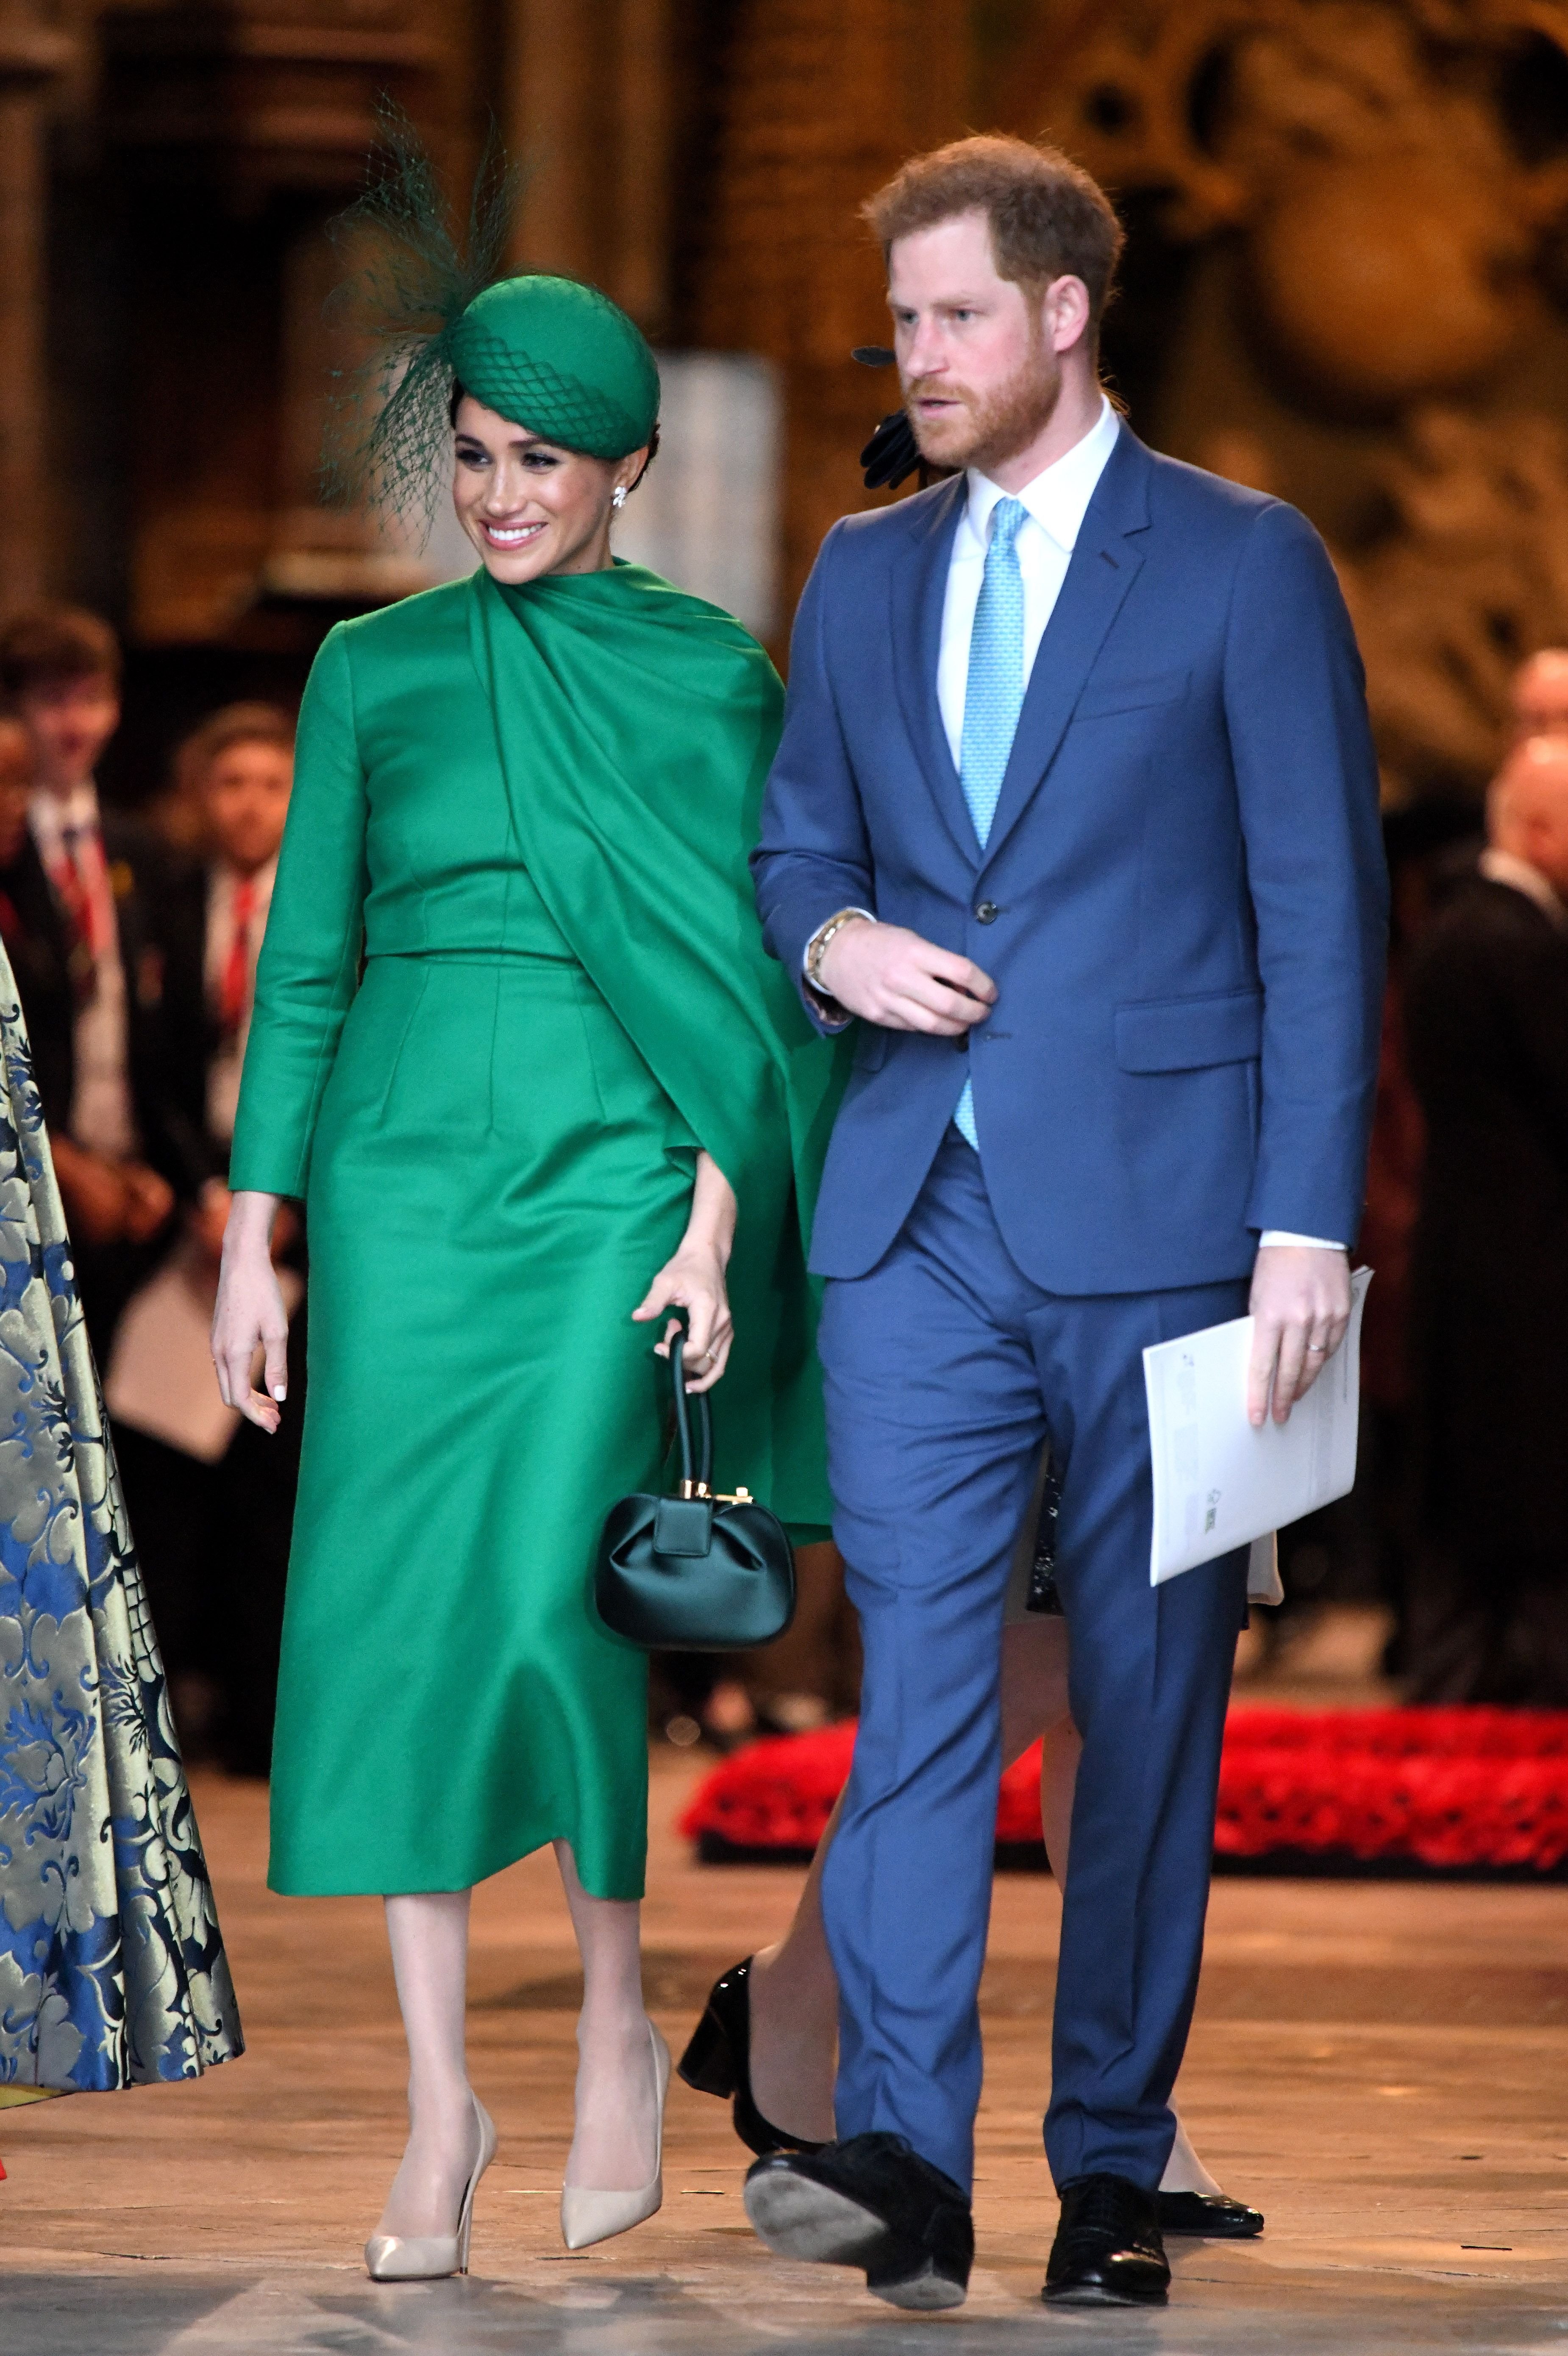 Duchess Meghan and Prince Harry depart after attending the Commonwealth Day Service at Westminster Abbey on March 09, 2020, in London, England | Photo: Karwai Tang/WireImage/Getty Images